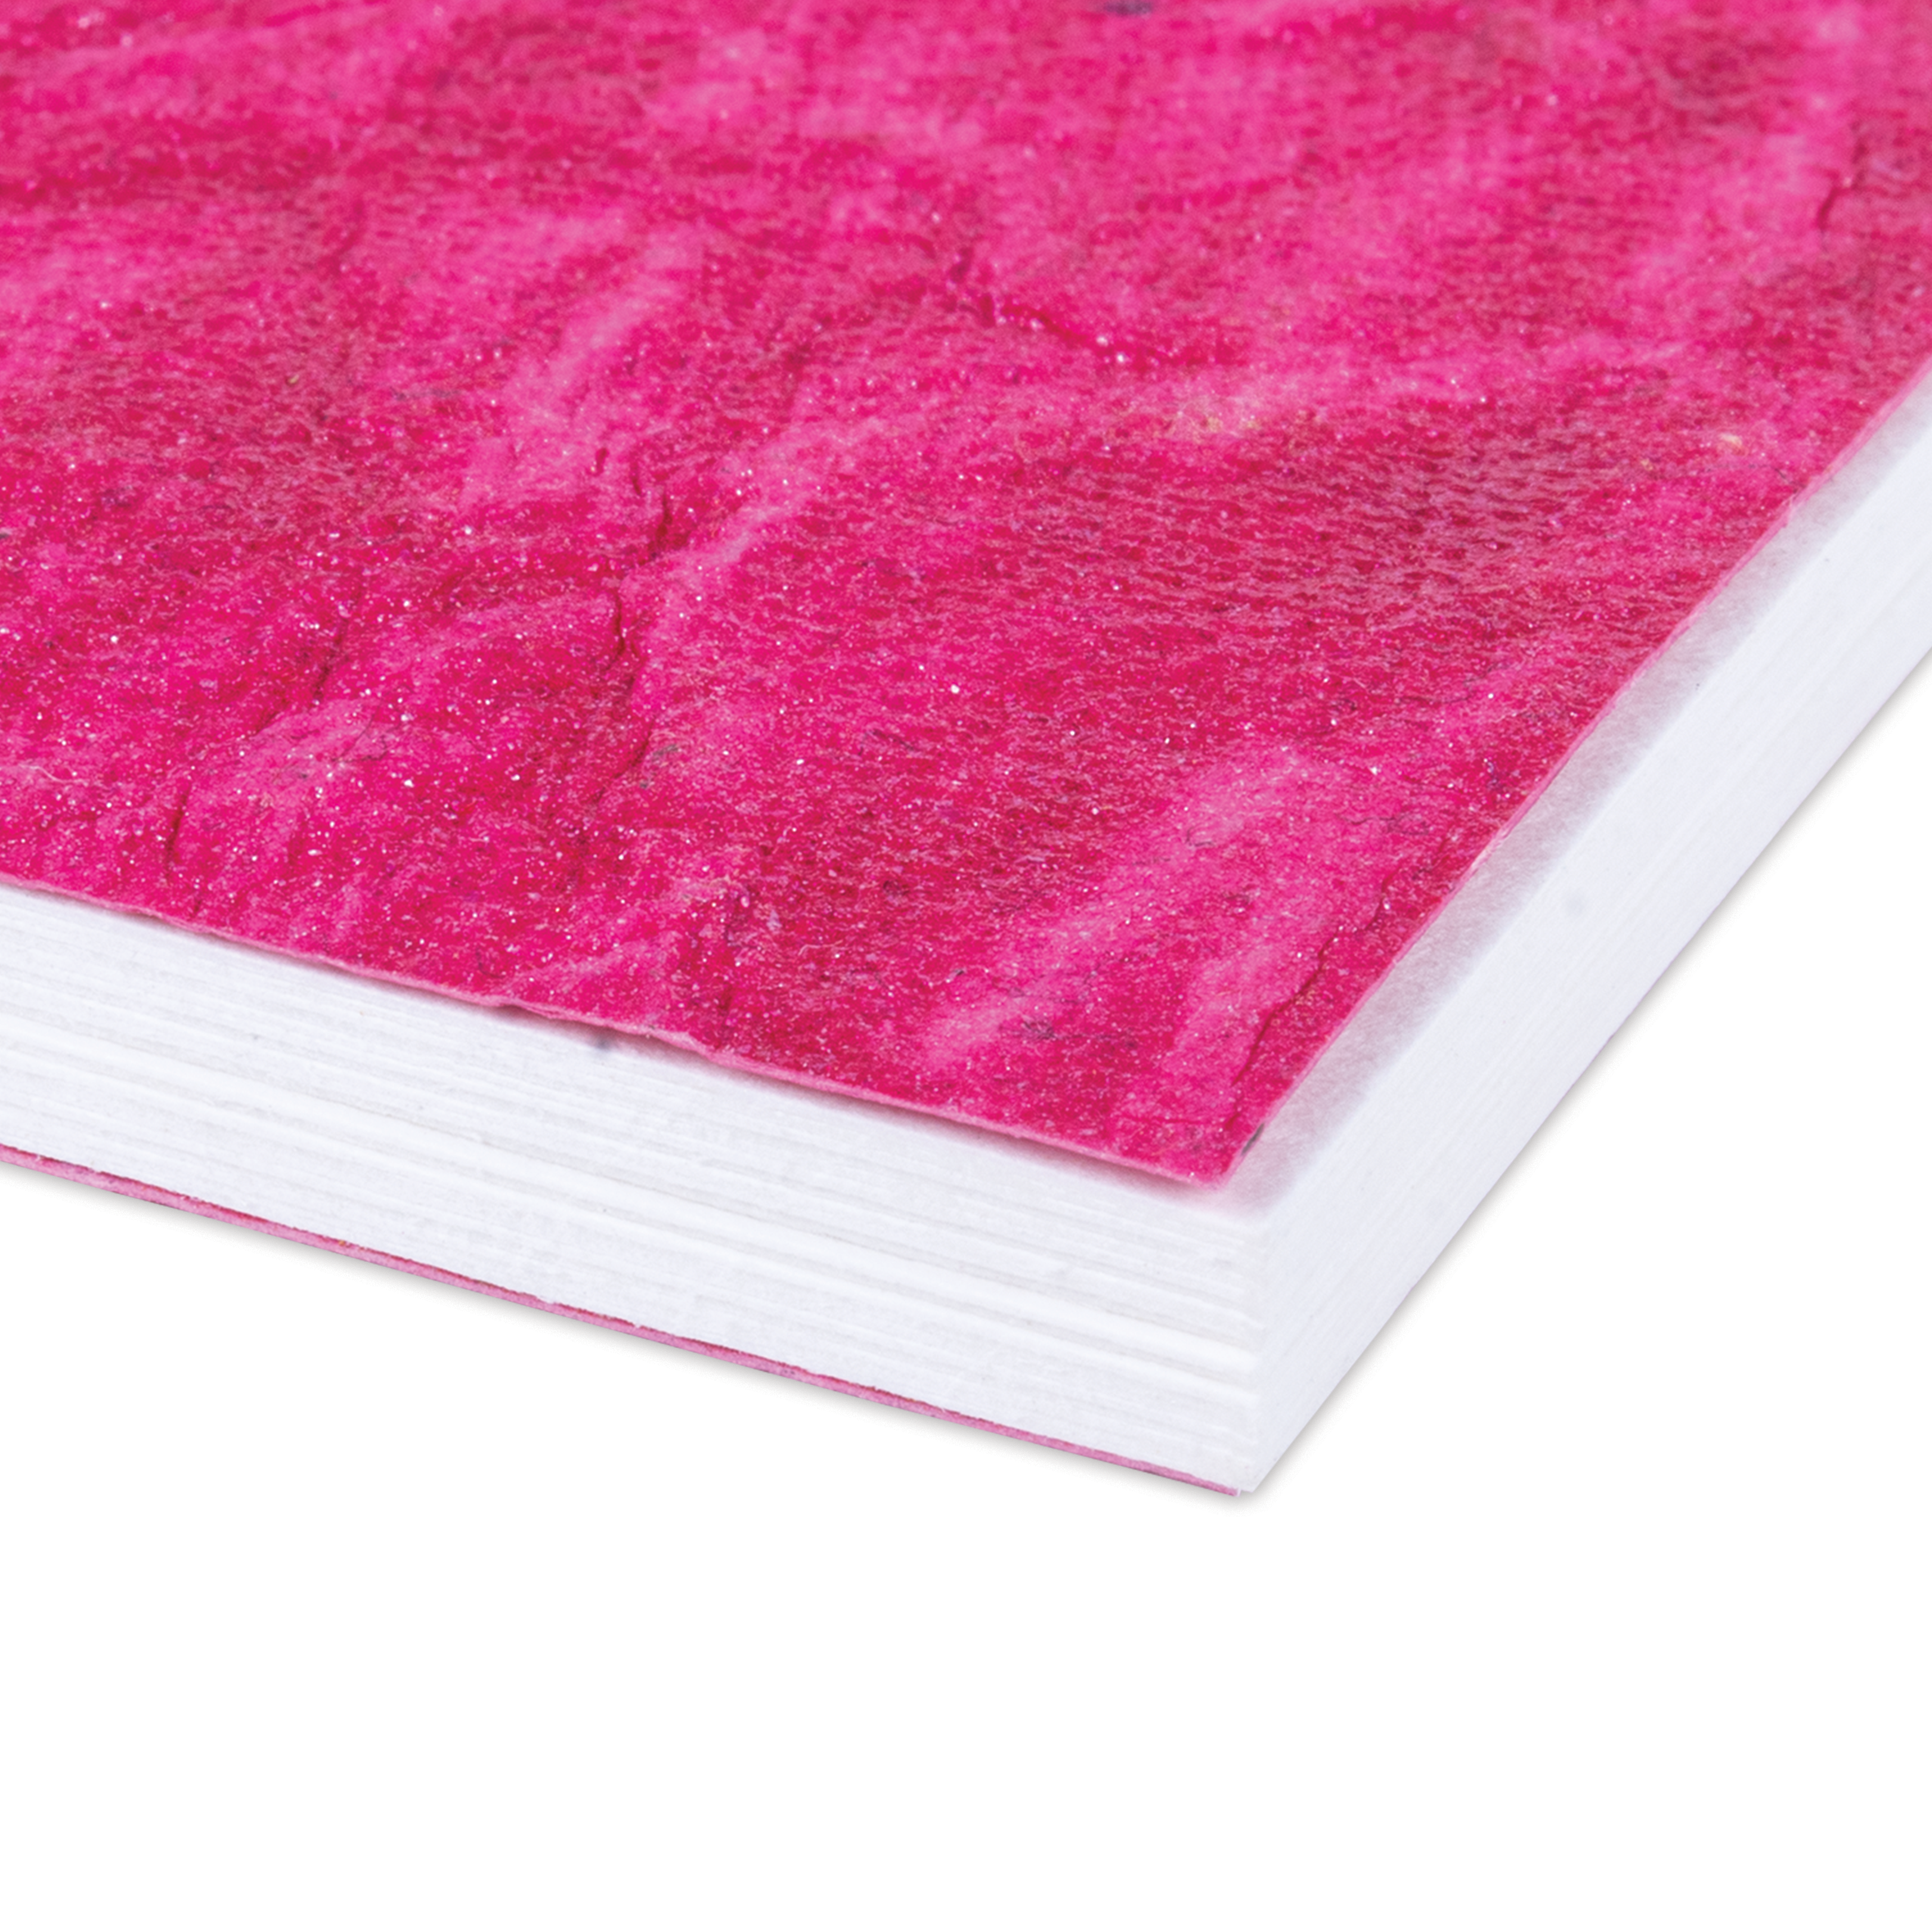 Simply Chic Spiral Bound Sketchbook with Leather Paper Cover | Fuchsia Pink | A6- 115gsm - 40Pages - 1Book